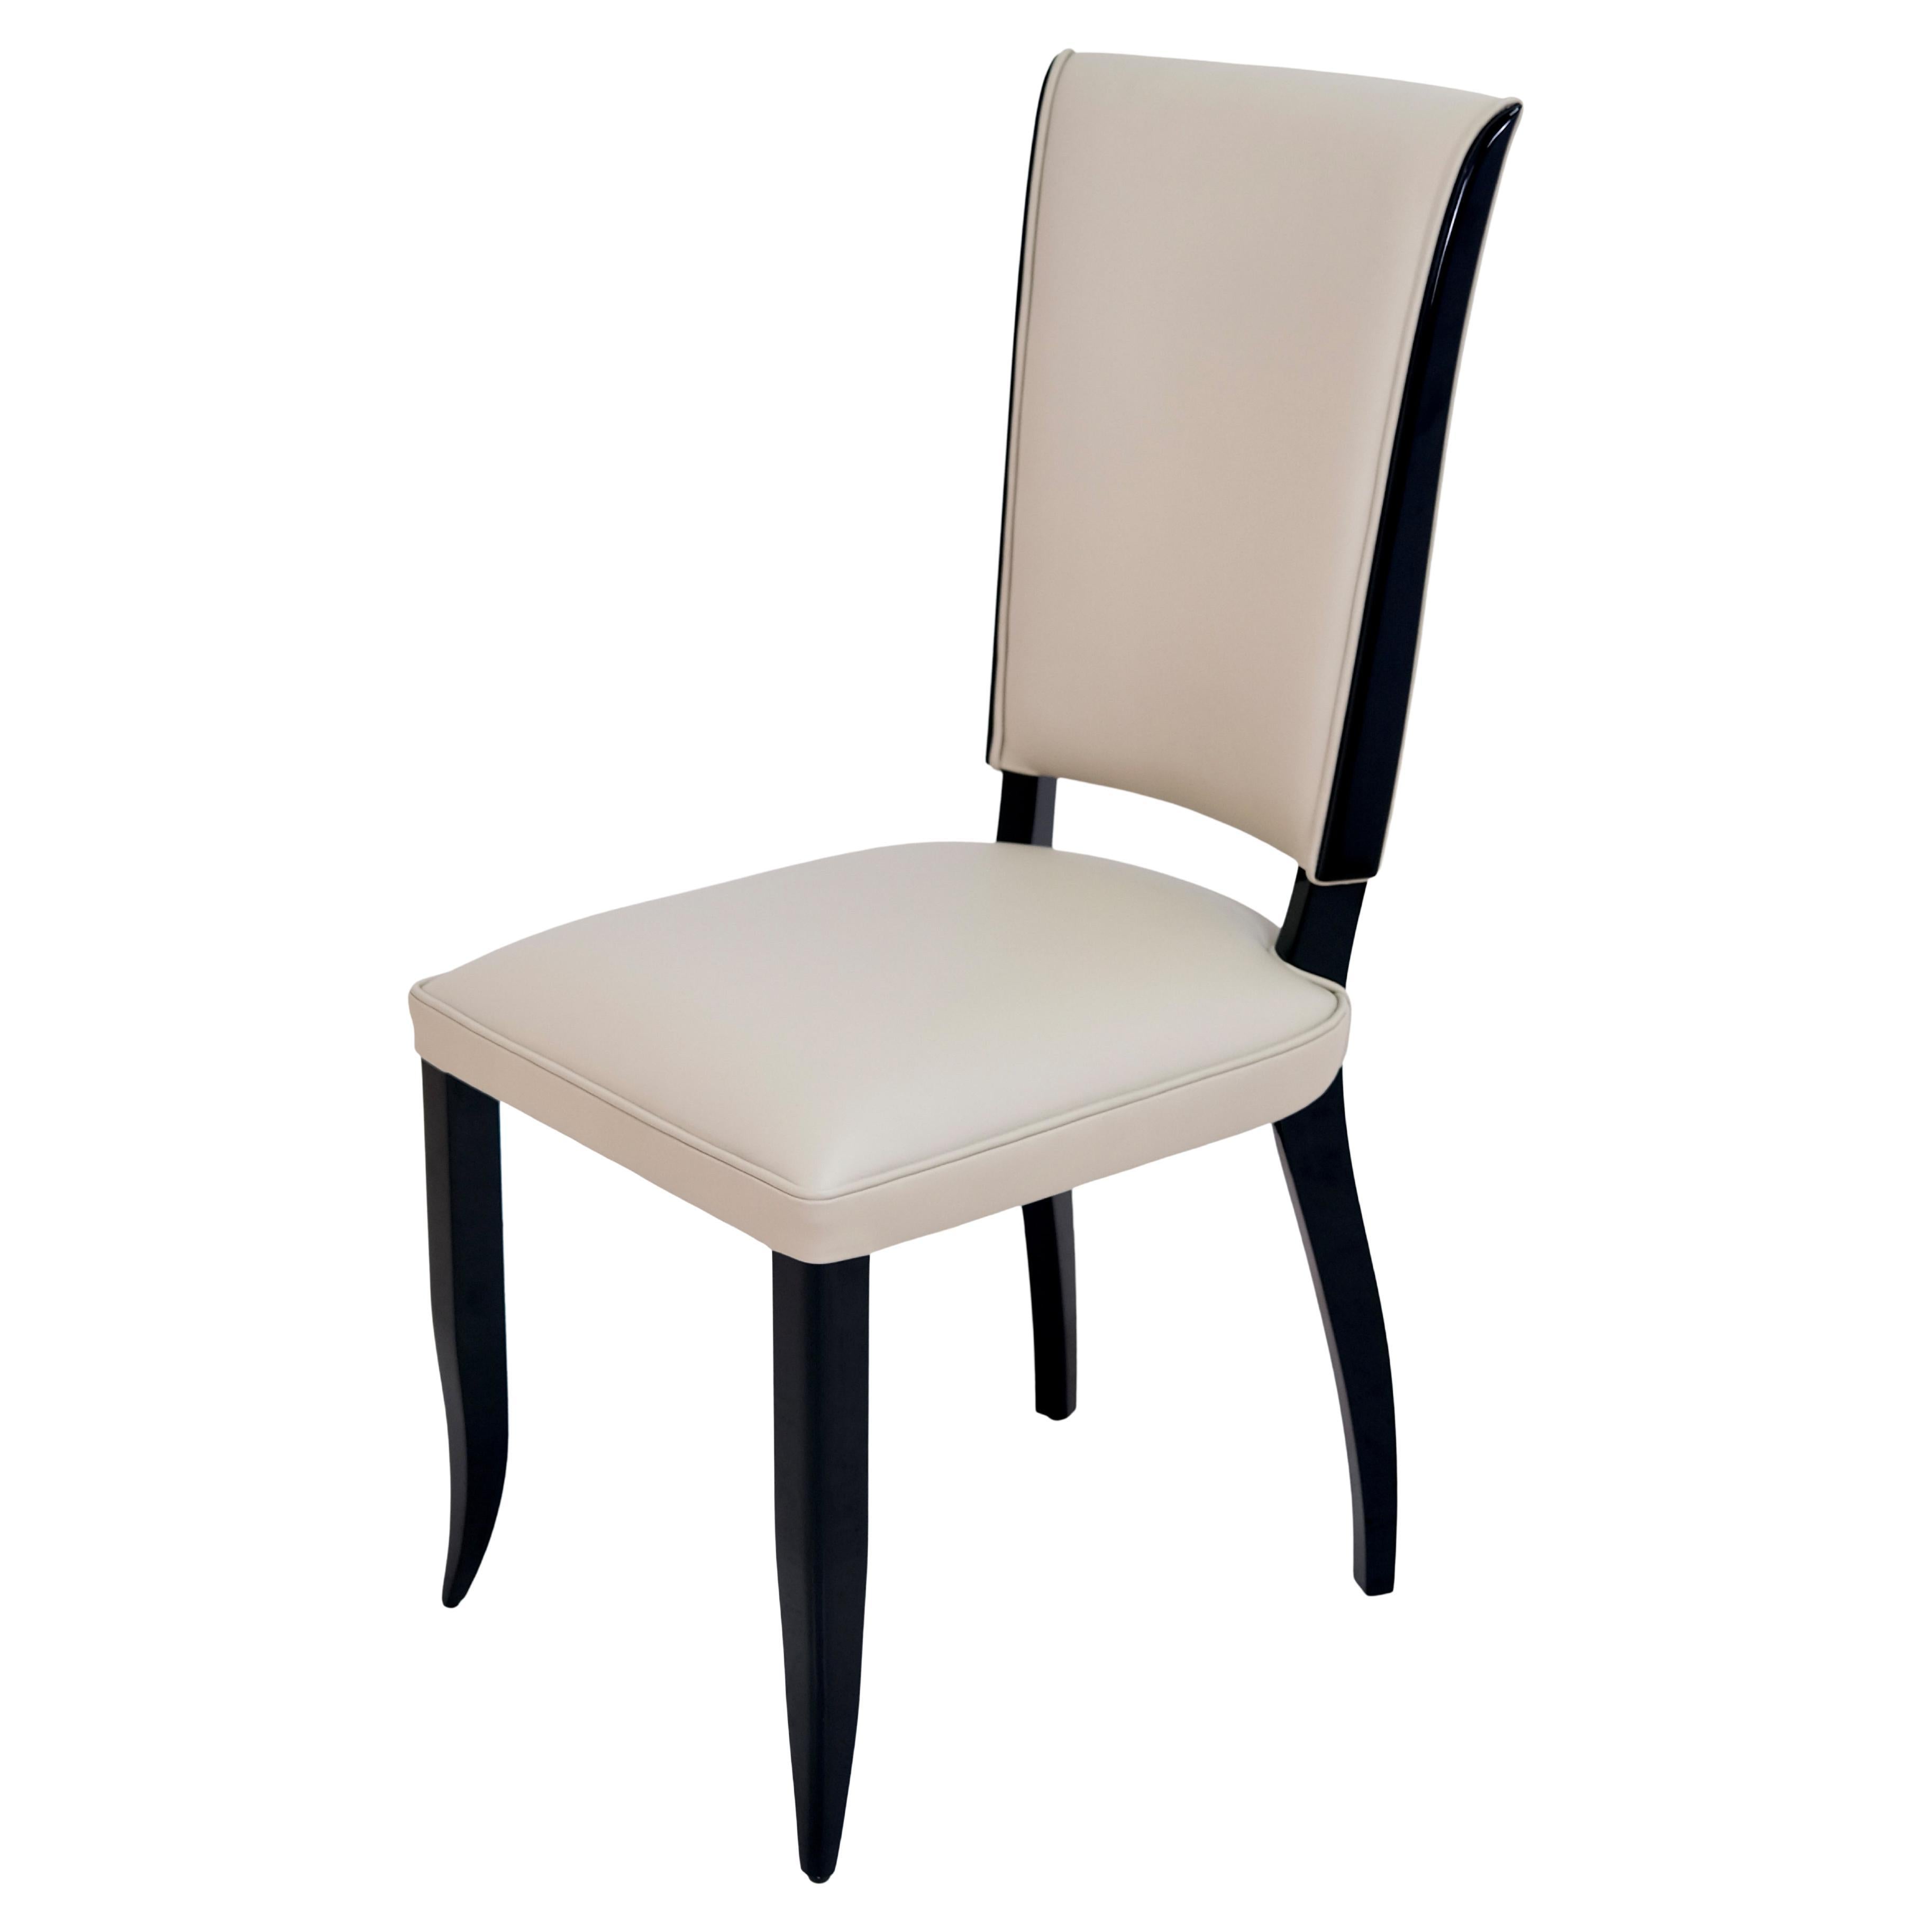 Set of Six Typical Art Deco Dining Room Chairs Black Lacquer and Beige Leather For Sale